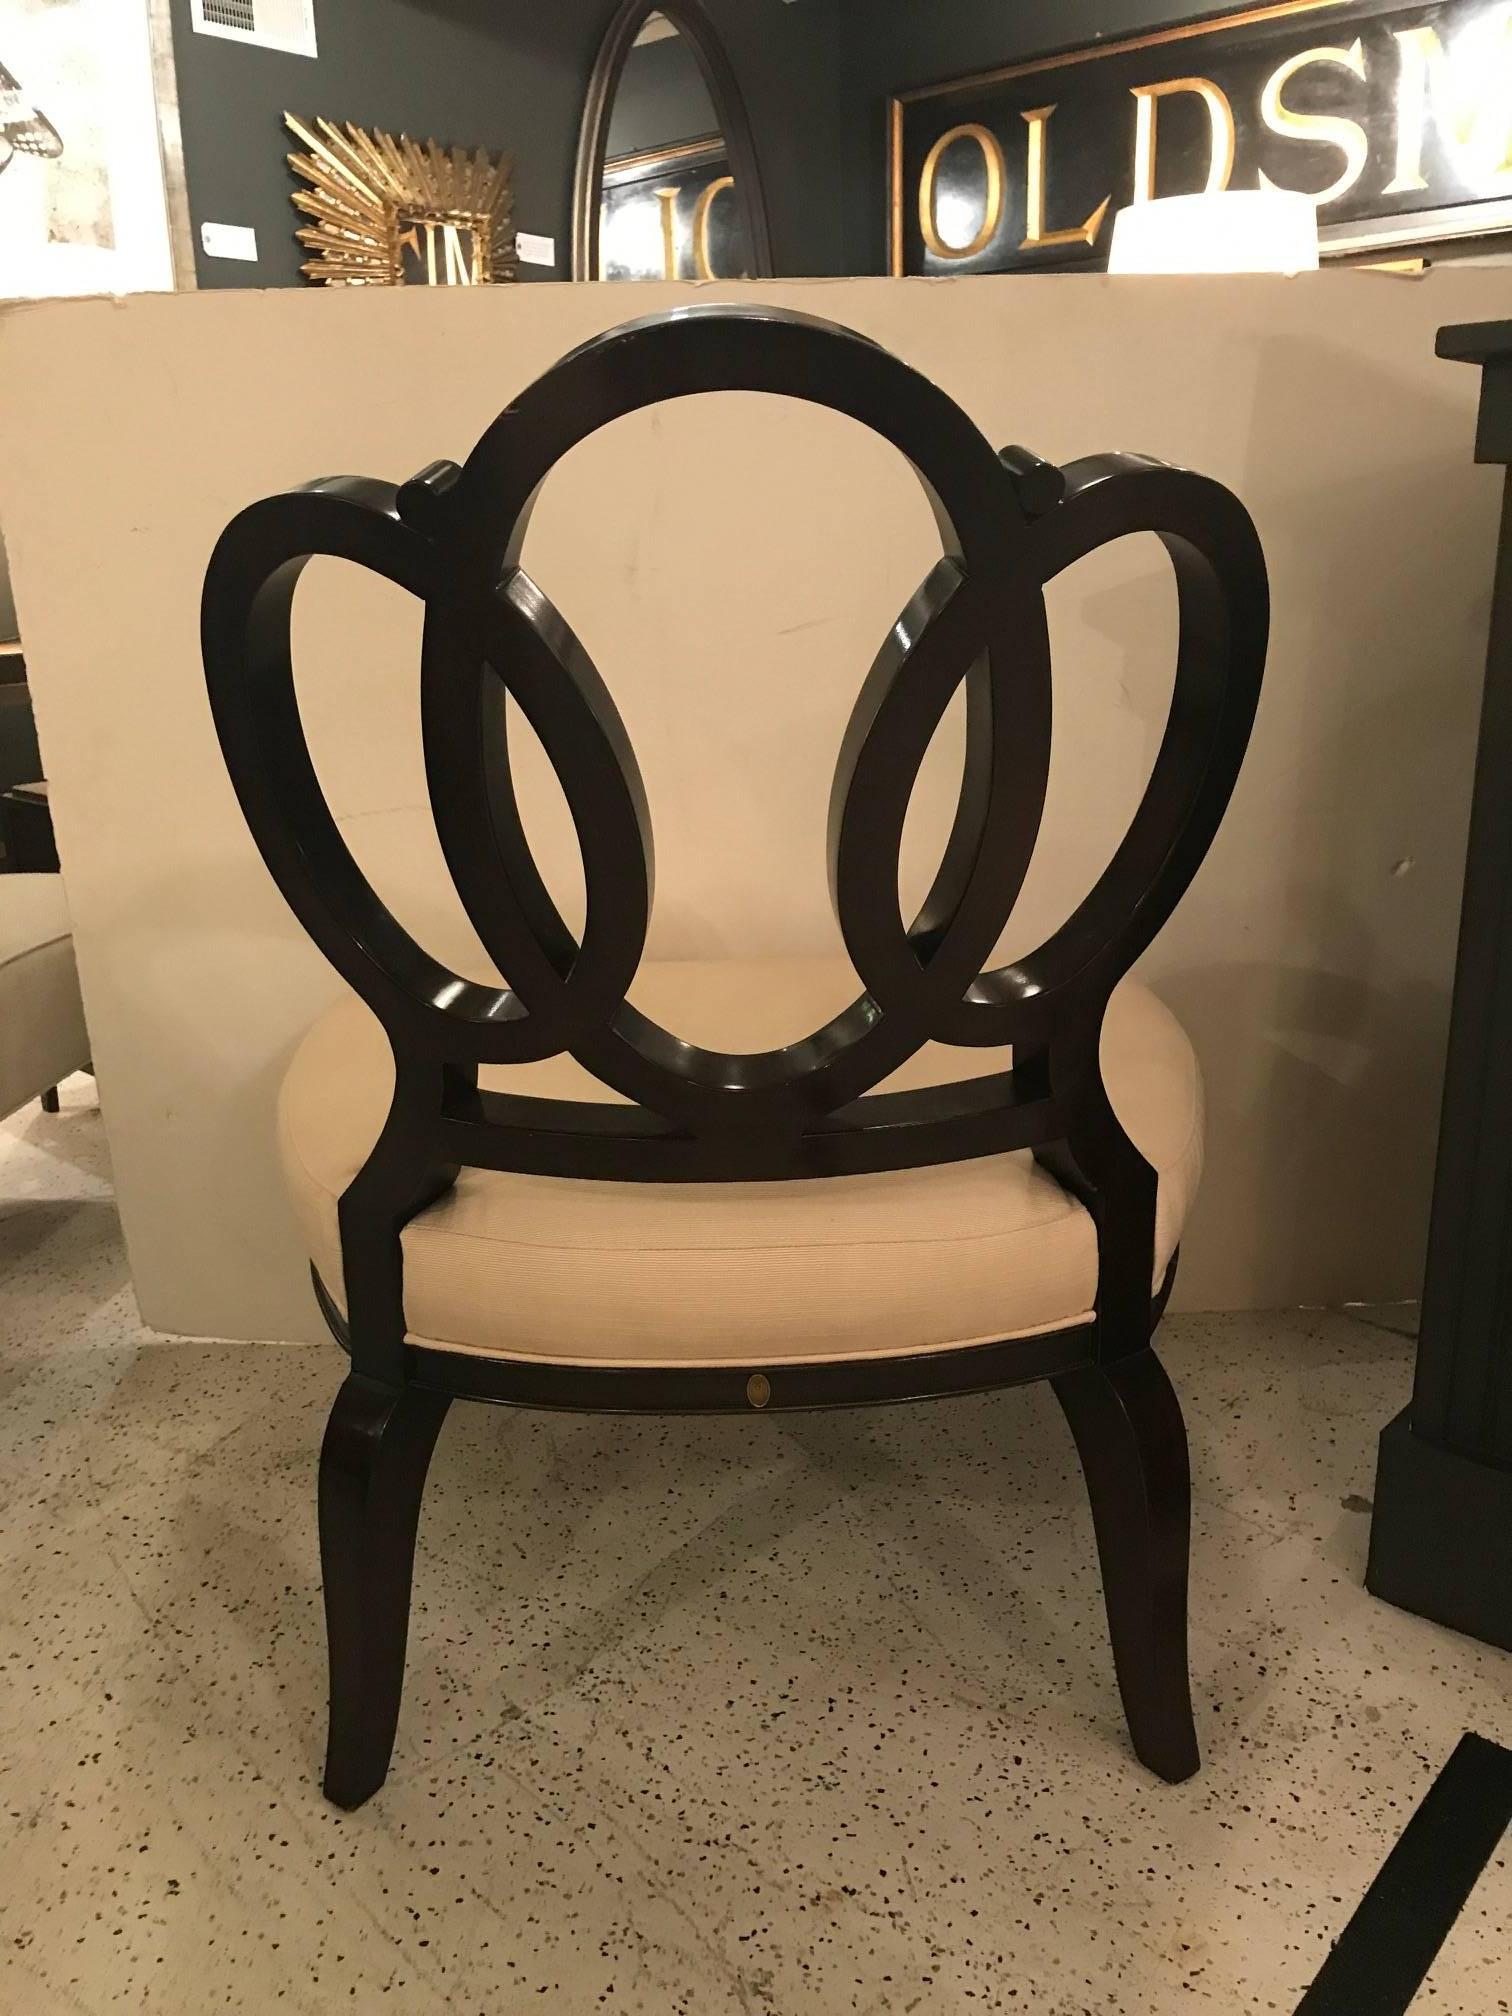 The bracelet chair by Barbara Barry speaks for itself: pure elegance and timeless beauty.The bracelet chair was one of a collection of pieces she designed for Henredon. The intelocking ovals that serve as the back are grand and well designed. The